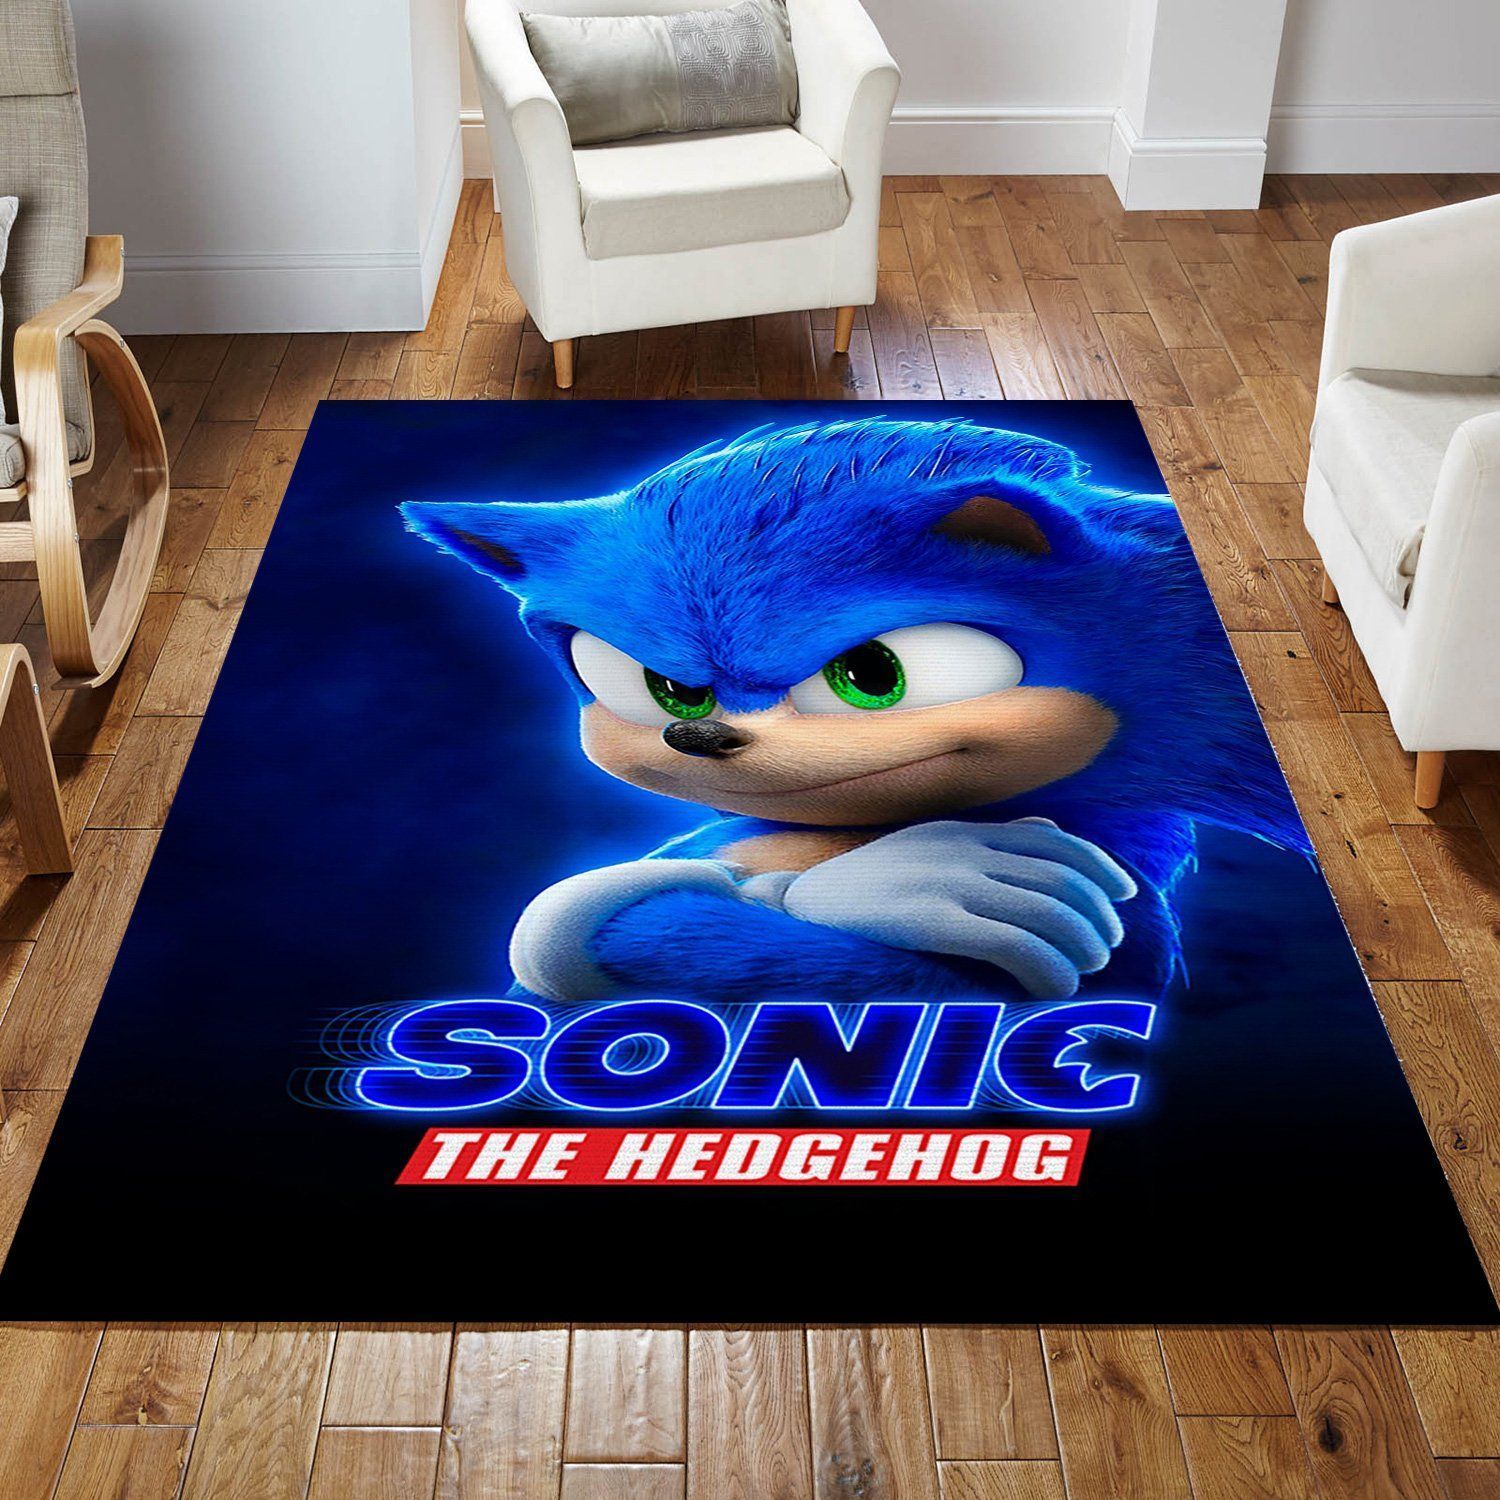 Sonic The Hedgehog Modeling Area Rug For Christmas, Living Room Rug, Home Decor - Indoor Outdoor Rugs 3